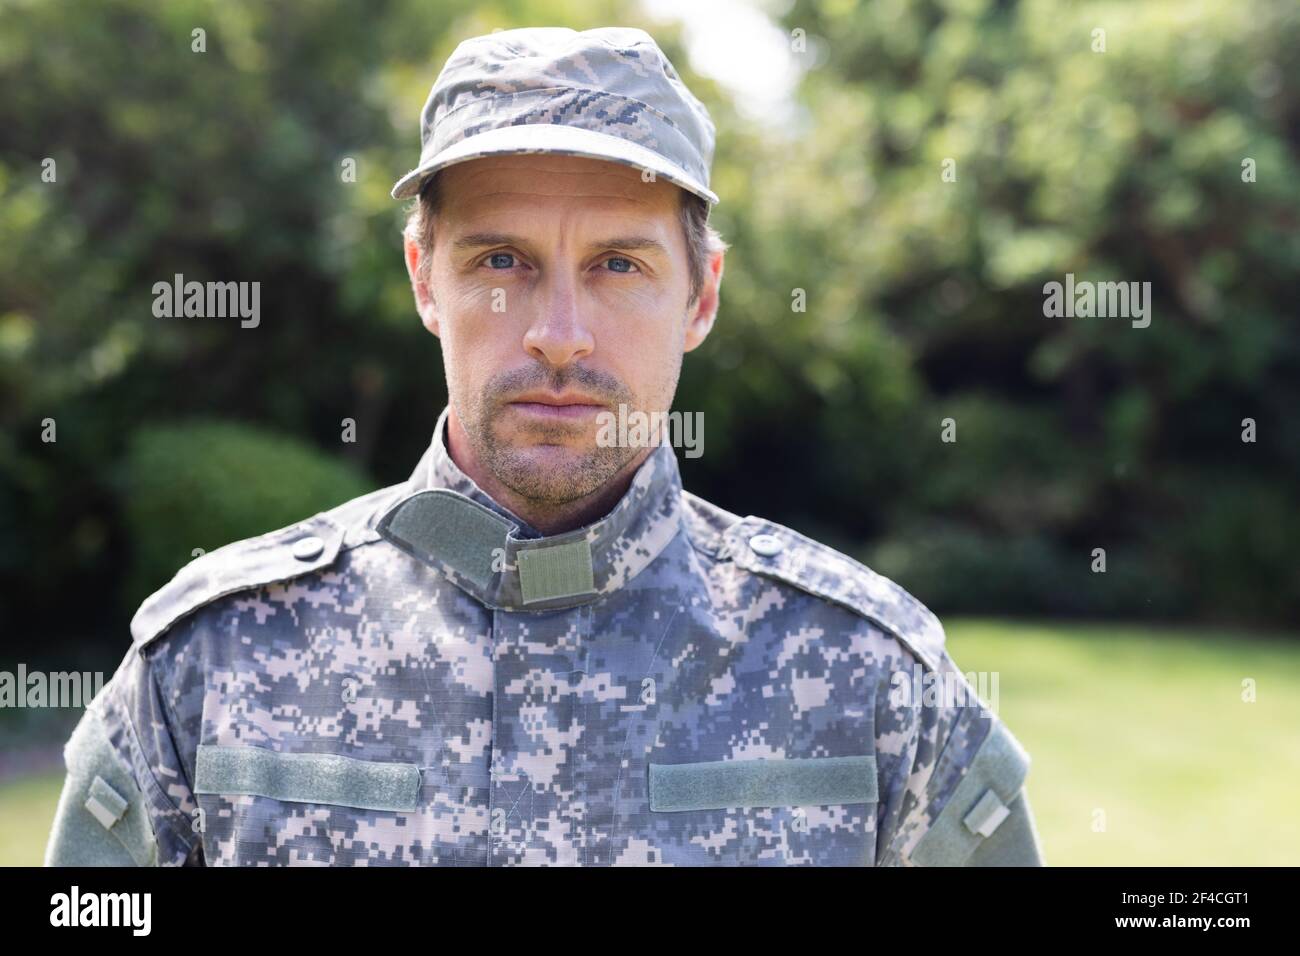 Close up portrait of caucasian male soldier wearing camo fatigues and cap standing in garden Stock Photo